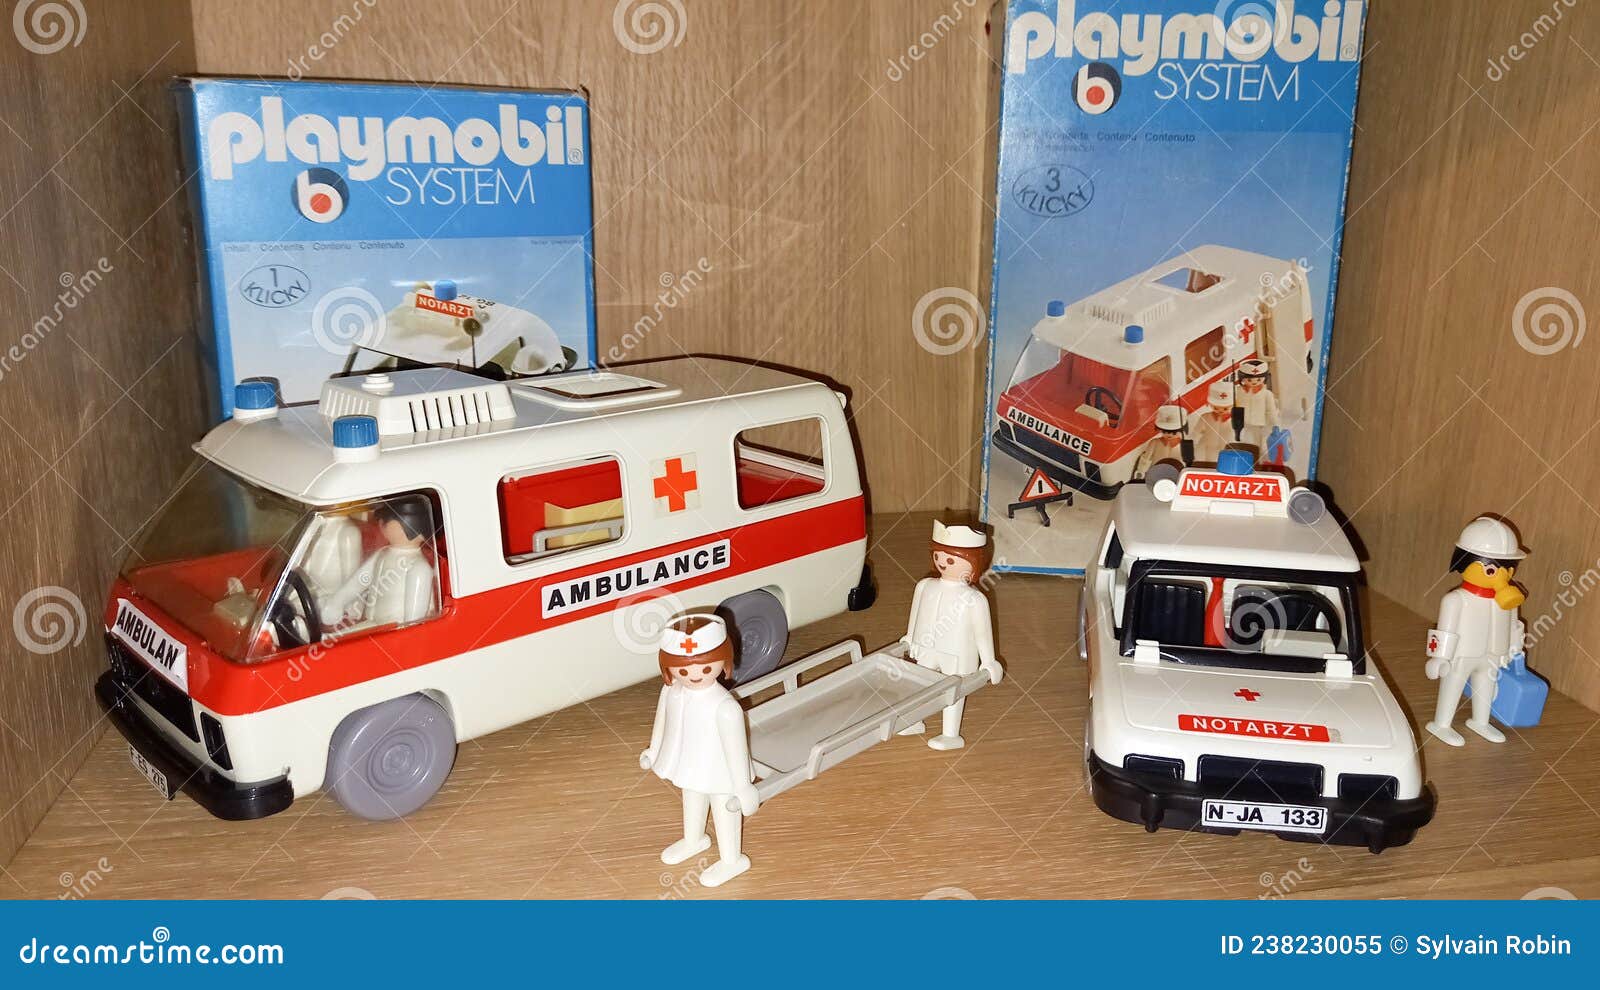 Playmobil Toy Vintage Ambulance Bus Van and Doctor Notarzt Car for Kids  with Old Retro Editorial Image - Image of oldtimer, assembling: 238230055